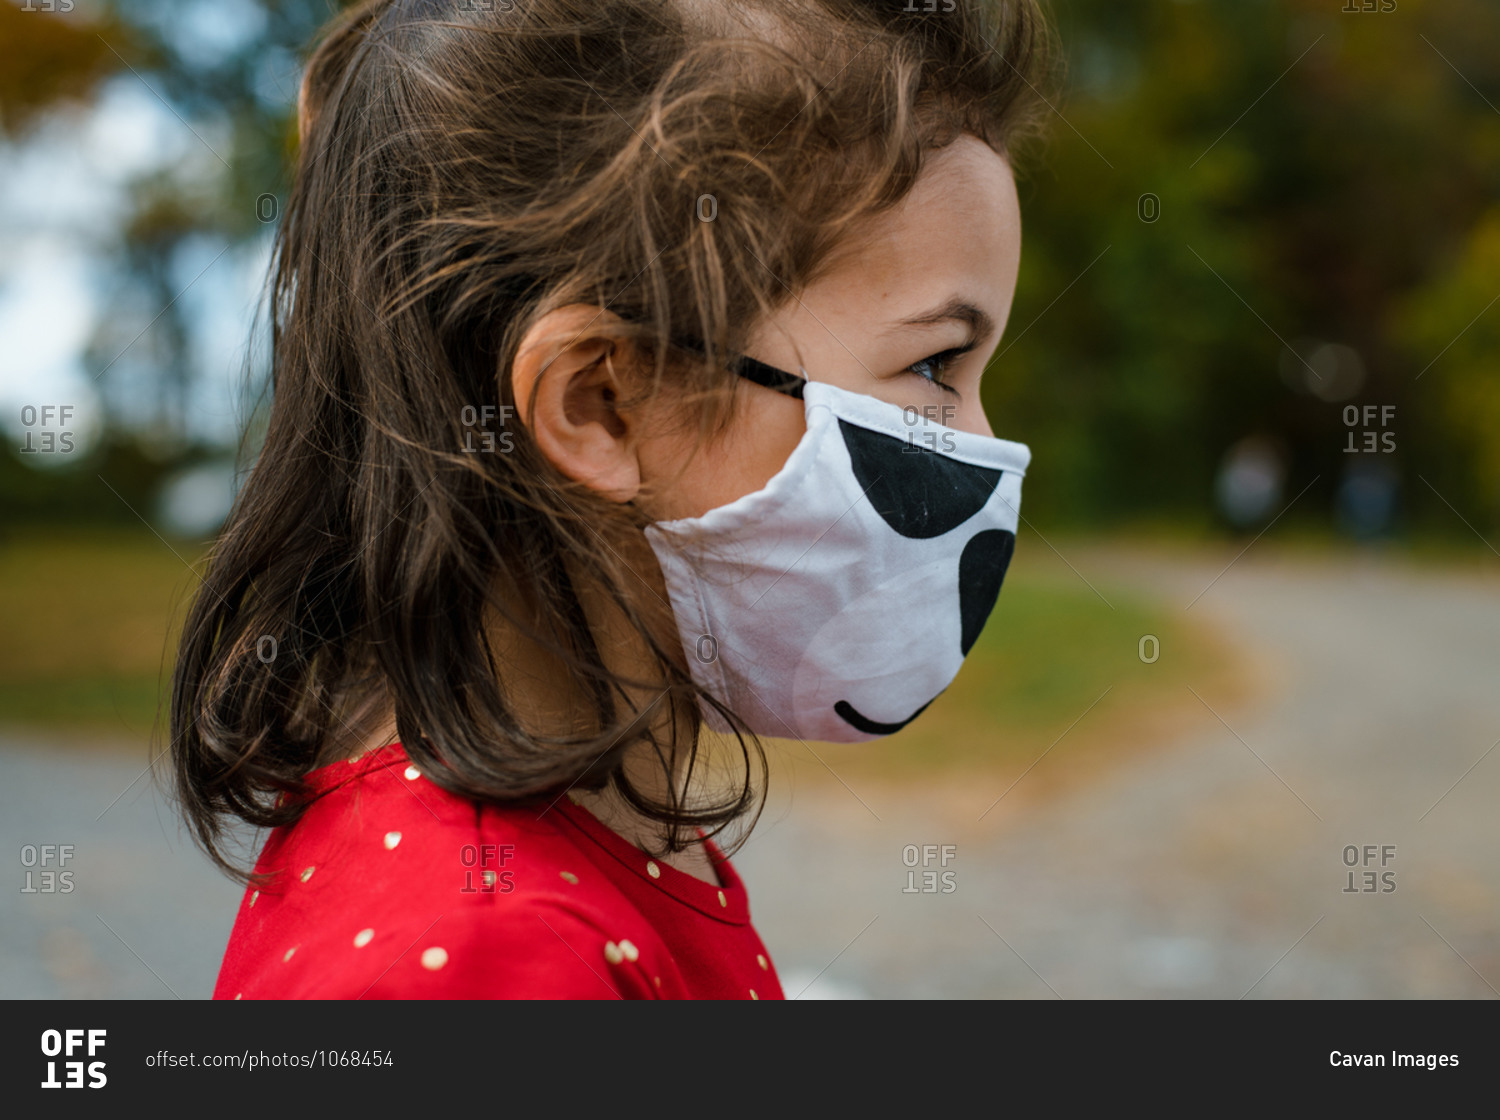 Preschool age girl wearing protective face mask outside in fall